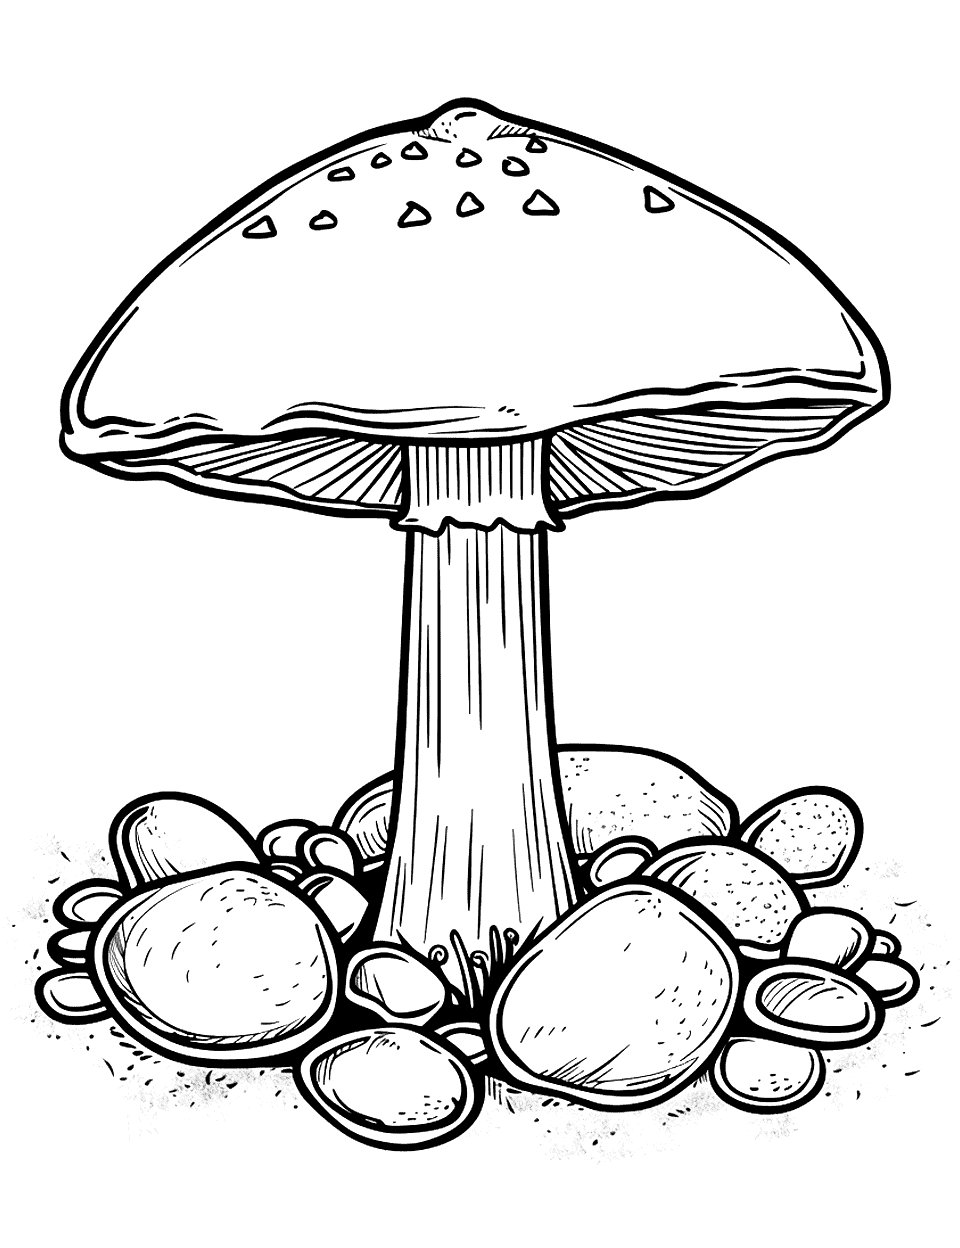 Mushroom and Pebbles Coloring Page - A simple scene featuring a mushroom growing amongst smooth river pebbles.